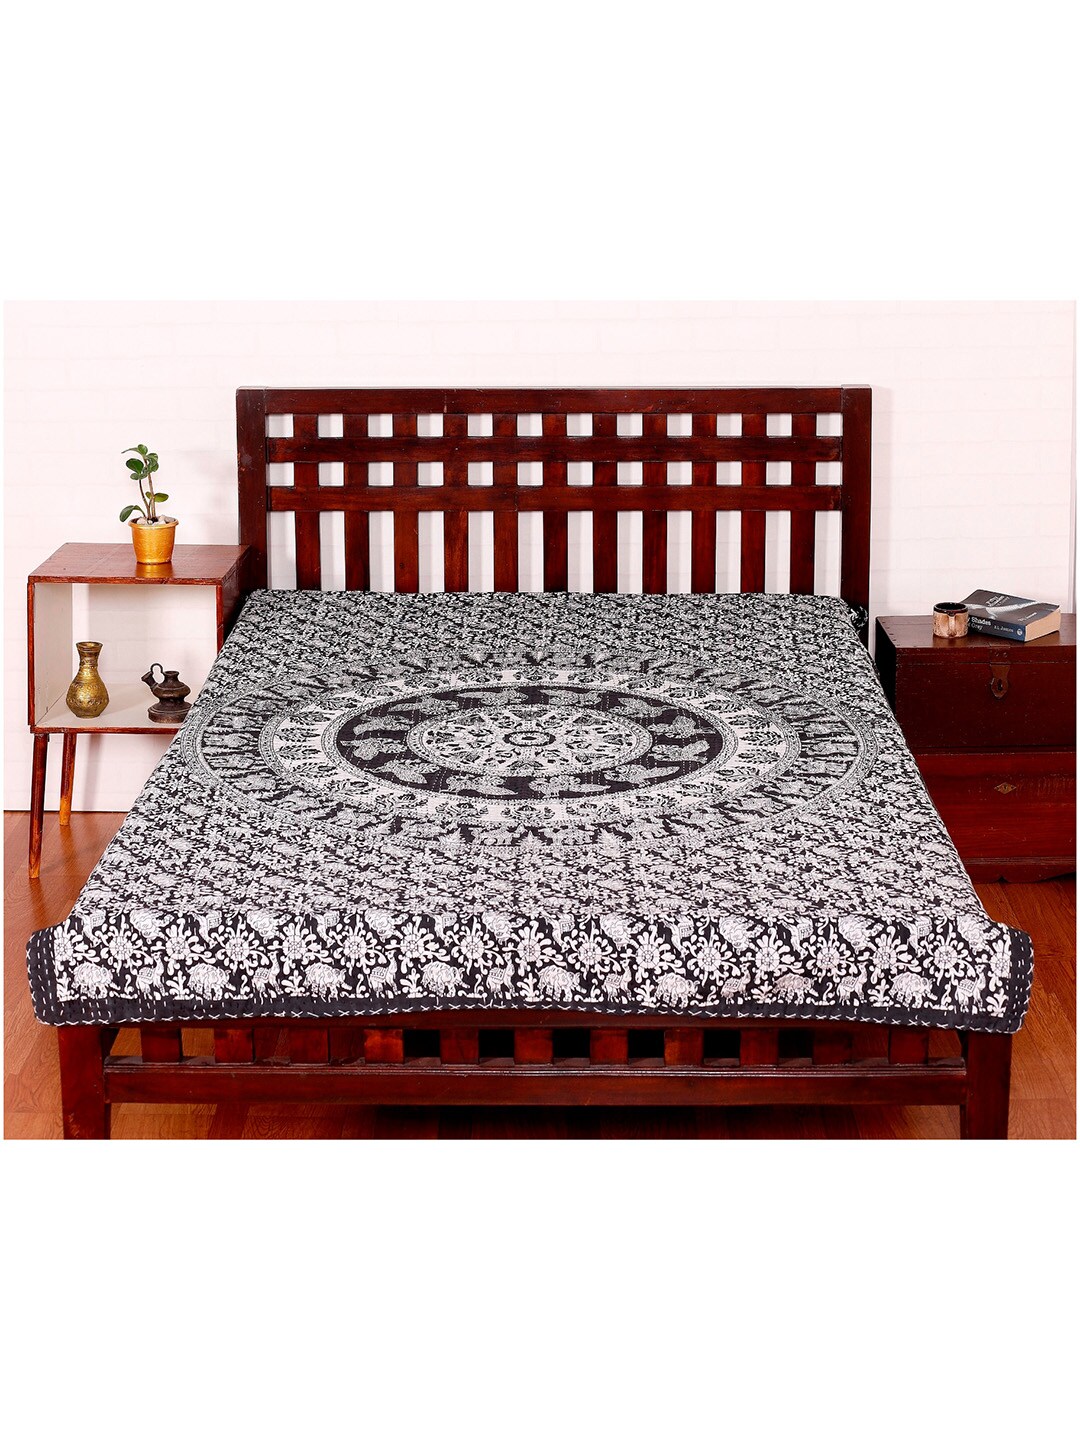 HANDICRAFT PALACE Black & White Printed Cotton Single Bed Cover Price in India